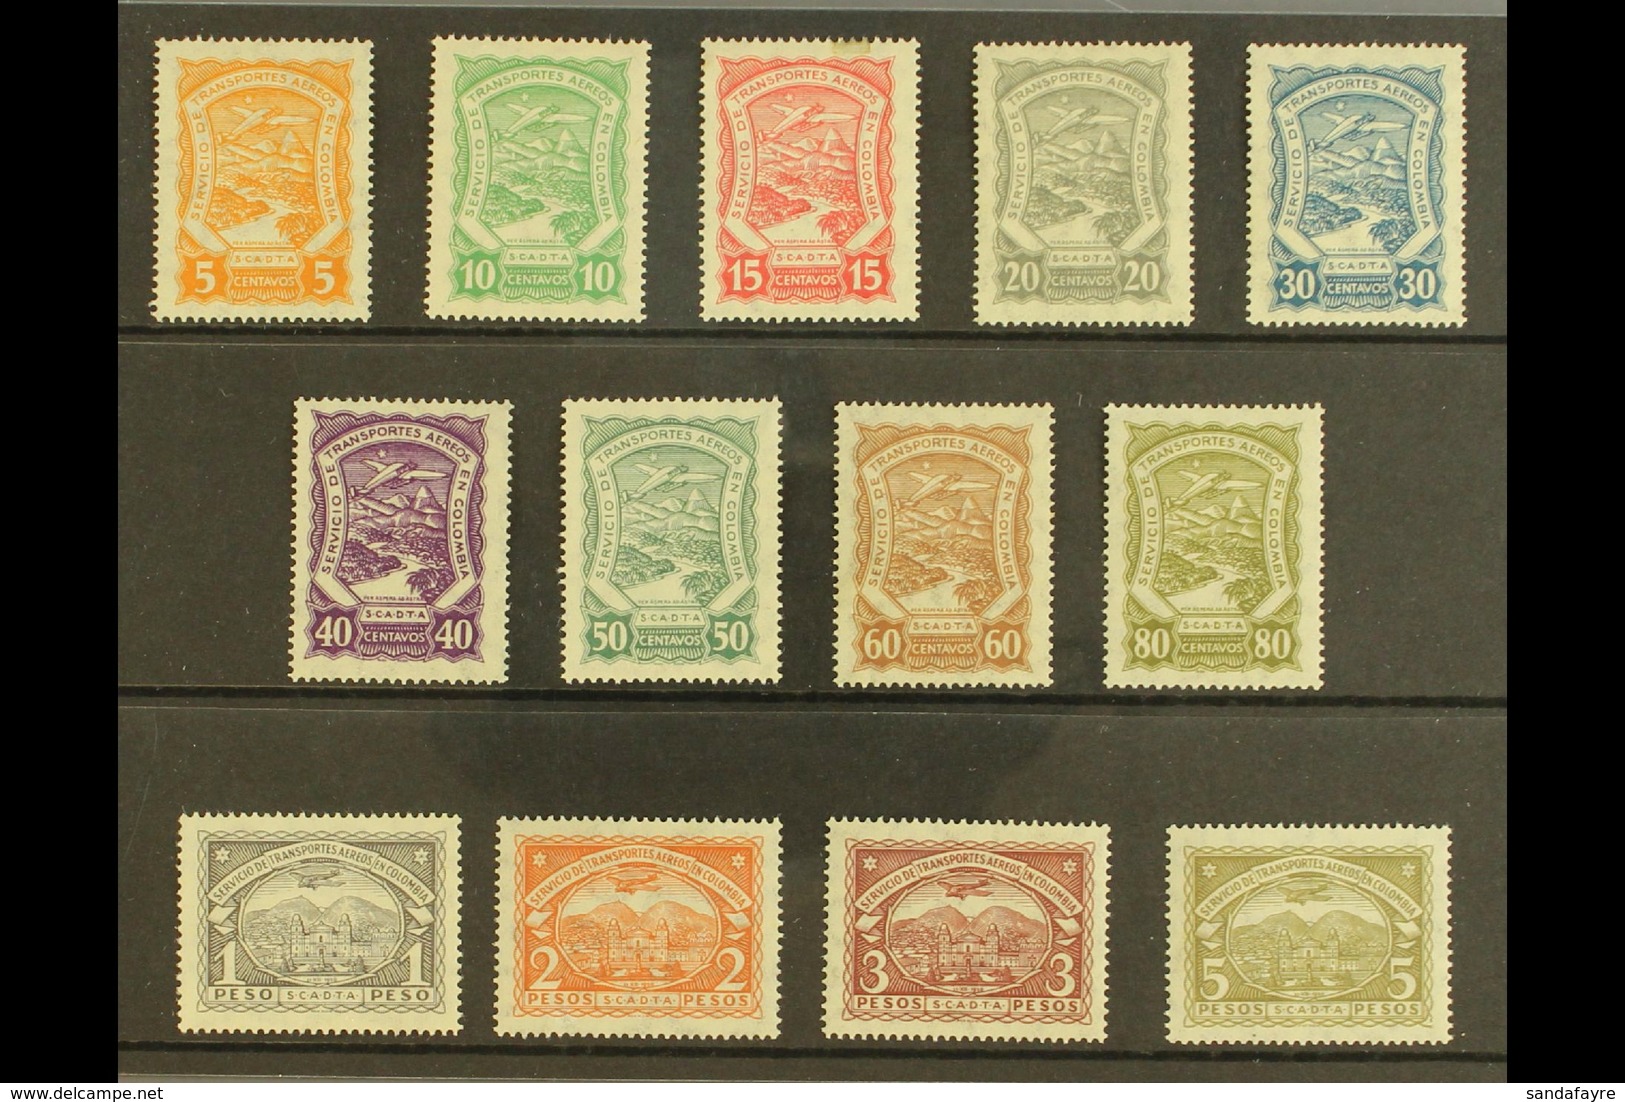 PRIVATE AIRS - SCADTA 1923-28 Complete Set, Scott C38/50 (SG 37/49, Michel 29/39 & 43/44), Never Hinged Mint, The 15c Wi - Kolumbien